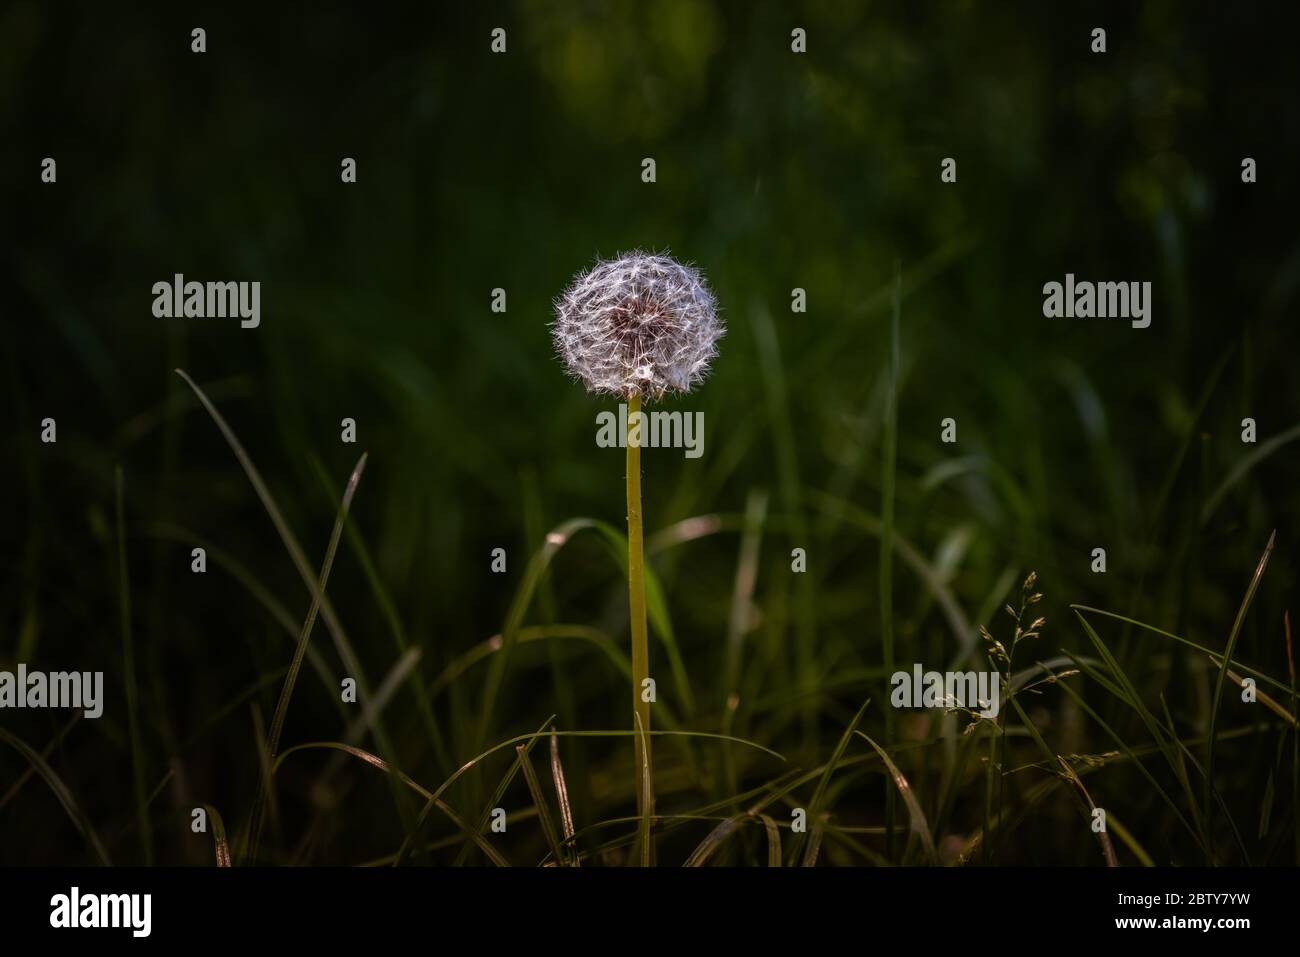 Bright round common dandelion on a dark green background of grass. Spring floral season - Photograph: Tony Taylor Stock Photo